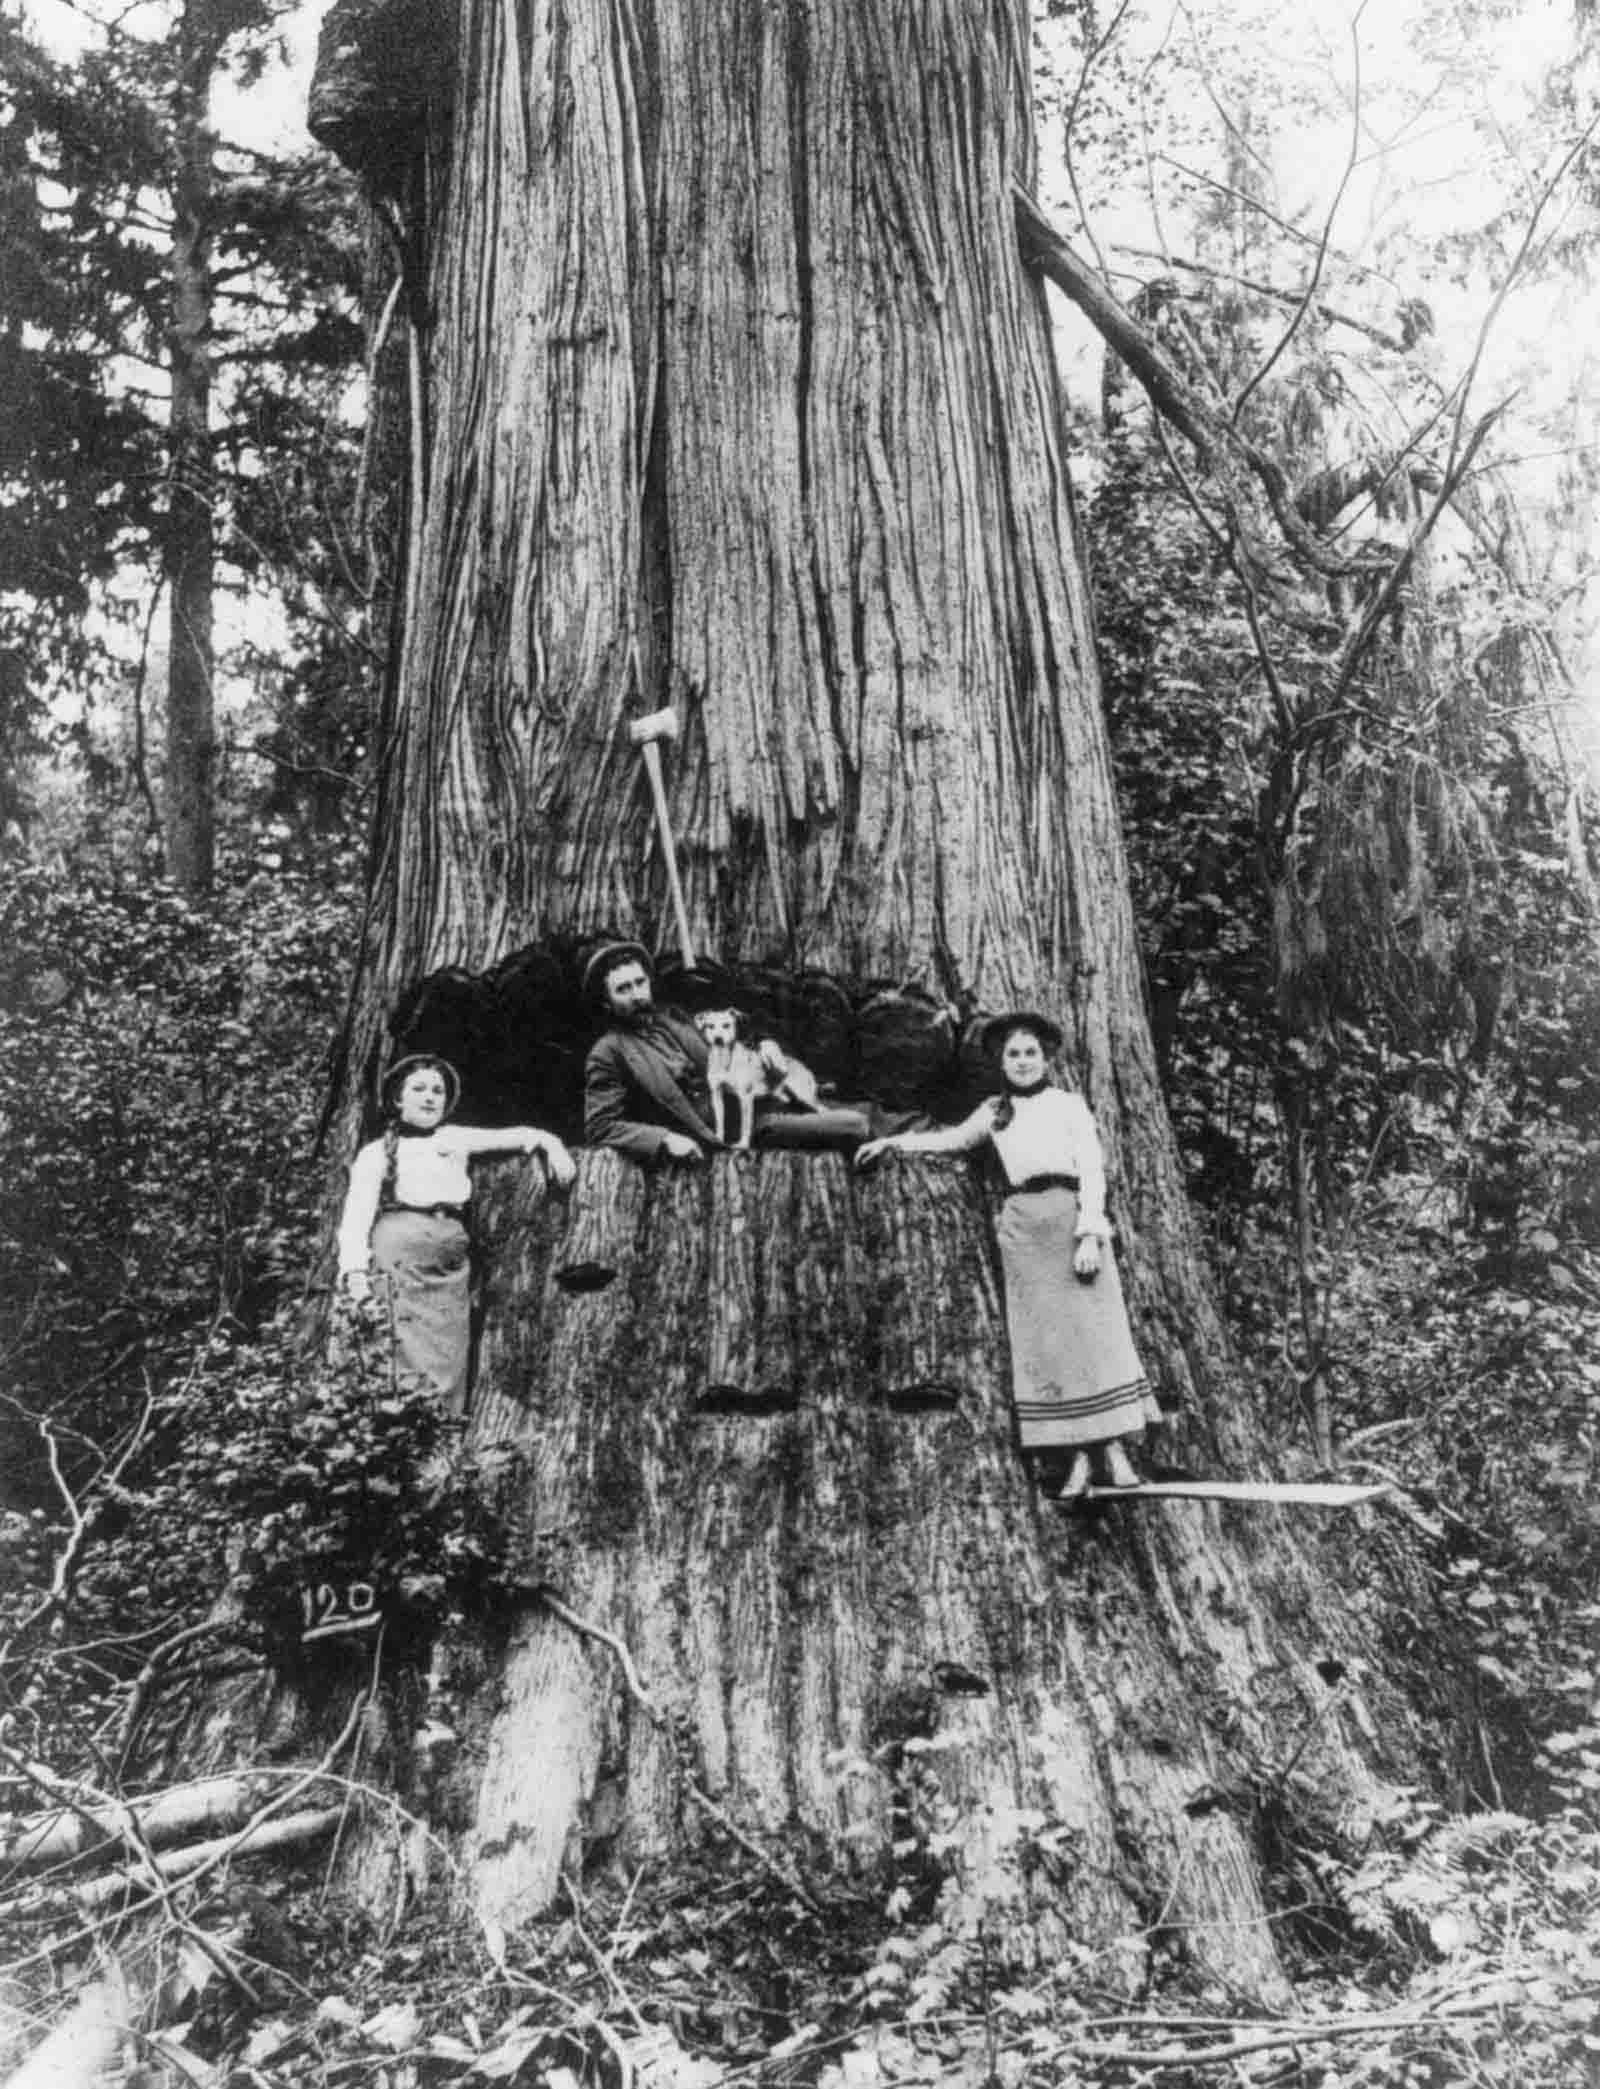 A lumberjack and two women pose in front of a tree near Seattle, Washington, 1905.